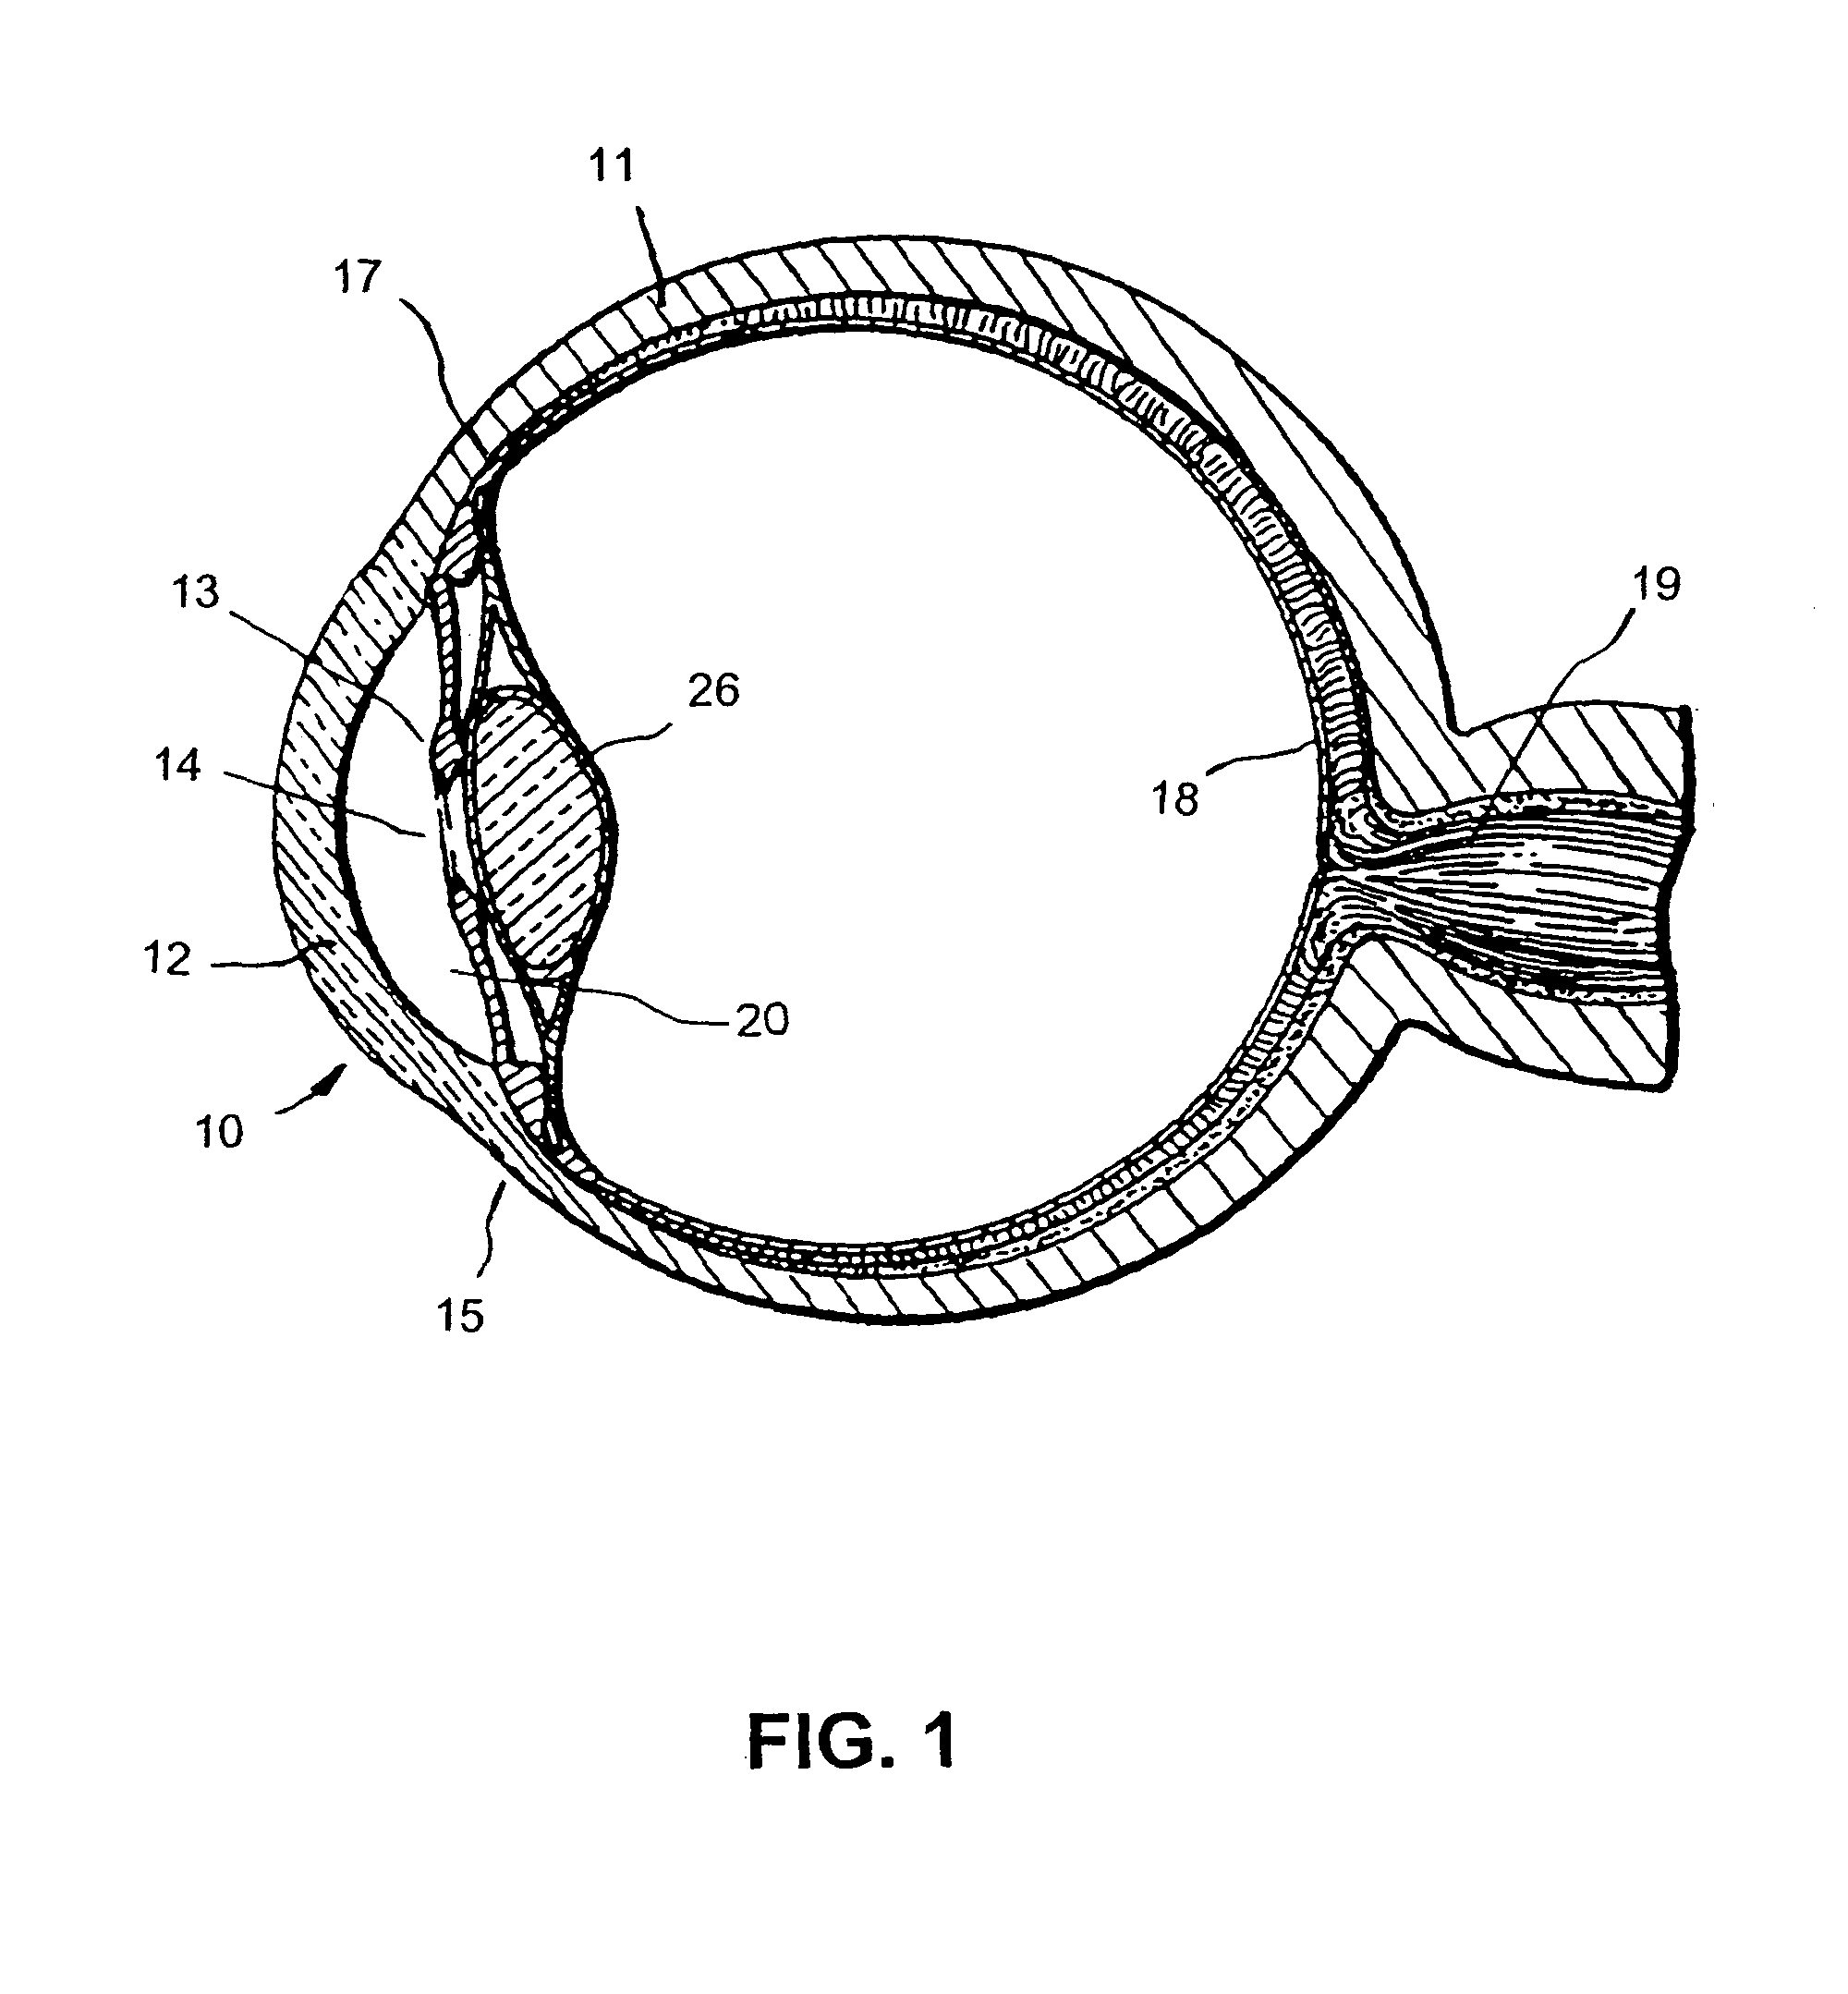 Implant with pressure sensor for glaucoma treatment